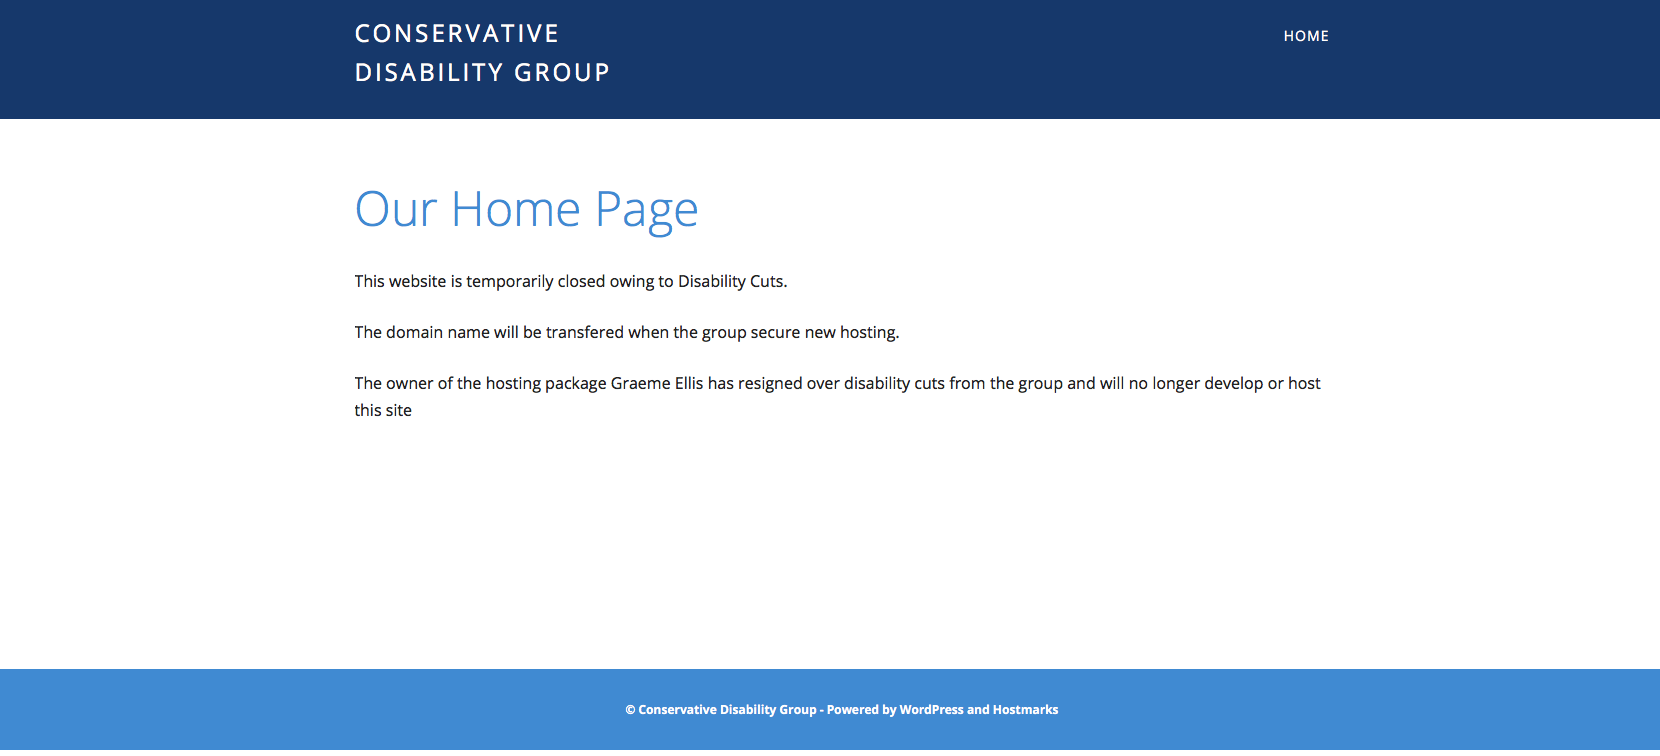 The Conservative Disability Group have temporarily closed their website 'owing to disability cuts'.